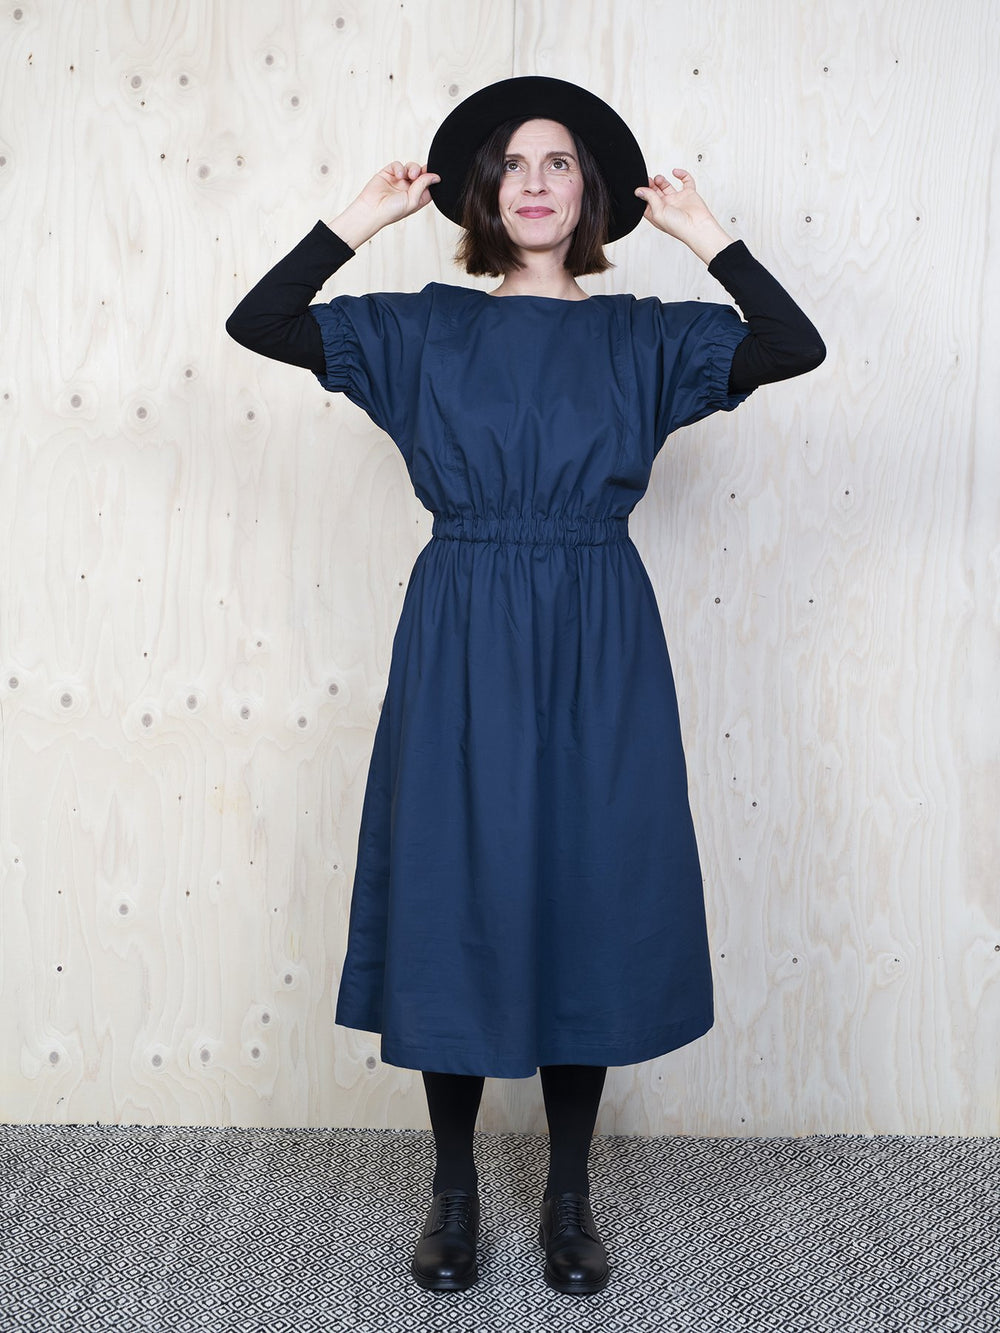 Woman wearing the Cuff Dress sewing pattern from The Assembly Line on The Fold Line. A dress pattern made in cotton, silk, lawn, linen, crepe de chine or wool crepe fabrics, featuring a mid-length finish, relaxed fit, round neck with keyhole opening in th